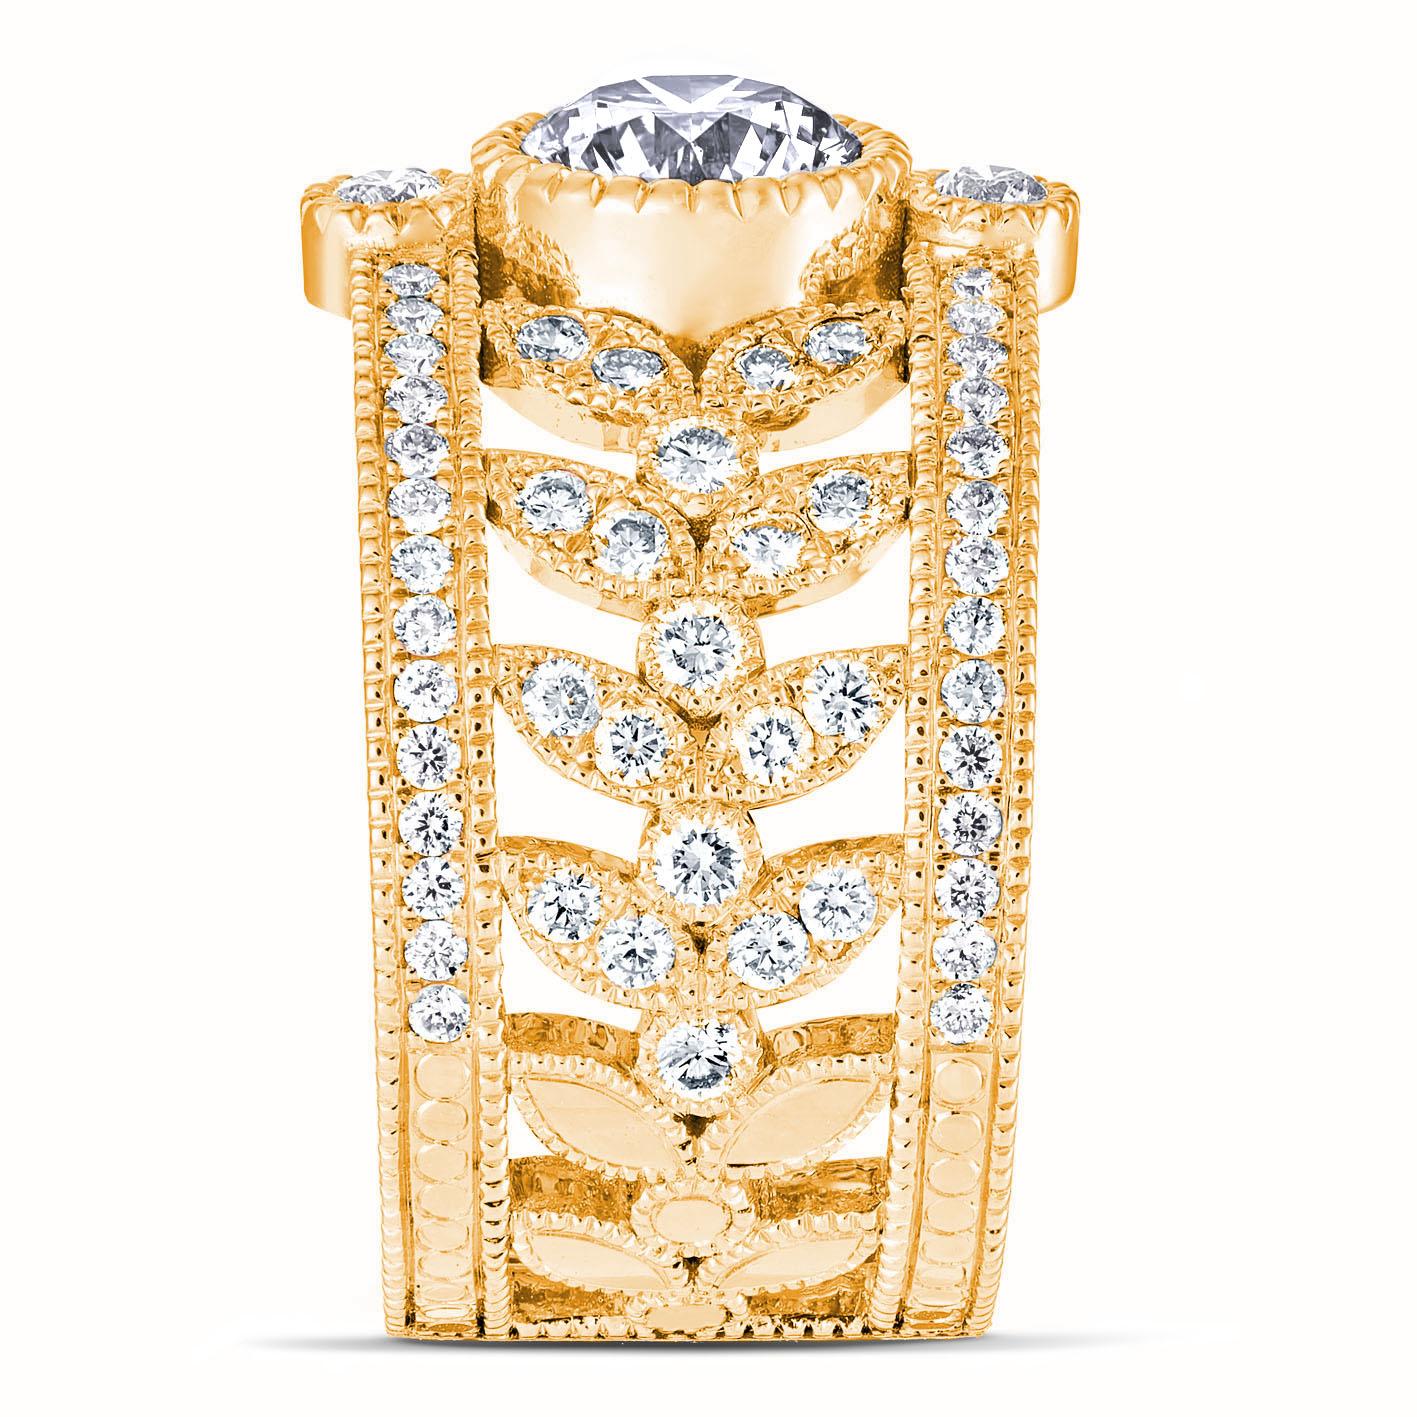 For Sale:  18k Yellow Gold Band Ring 0.70 Carat Diamond GIA Certified and 1 Cts of Diamonds 2